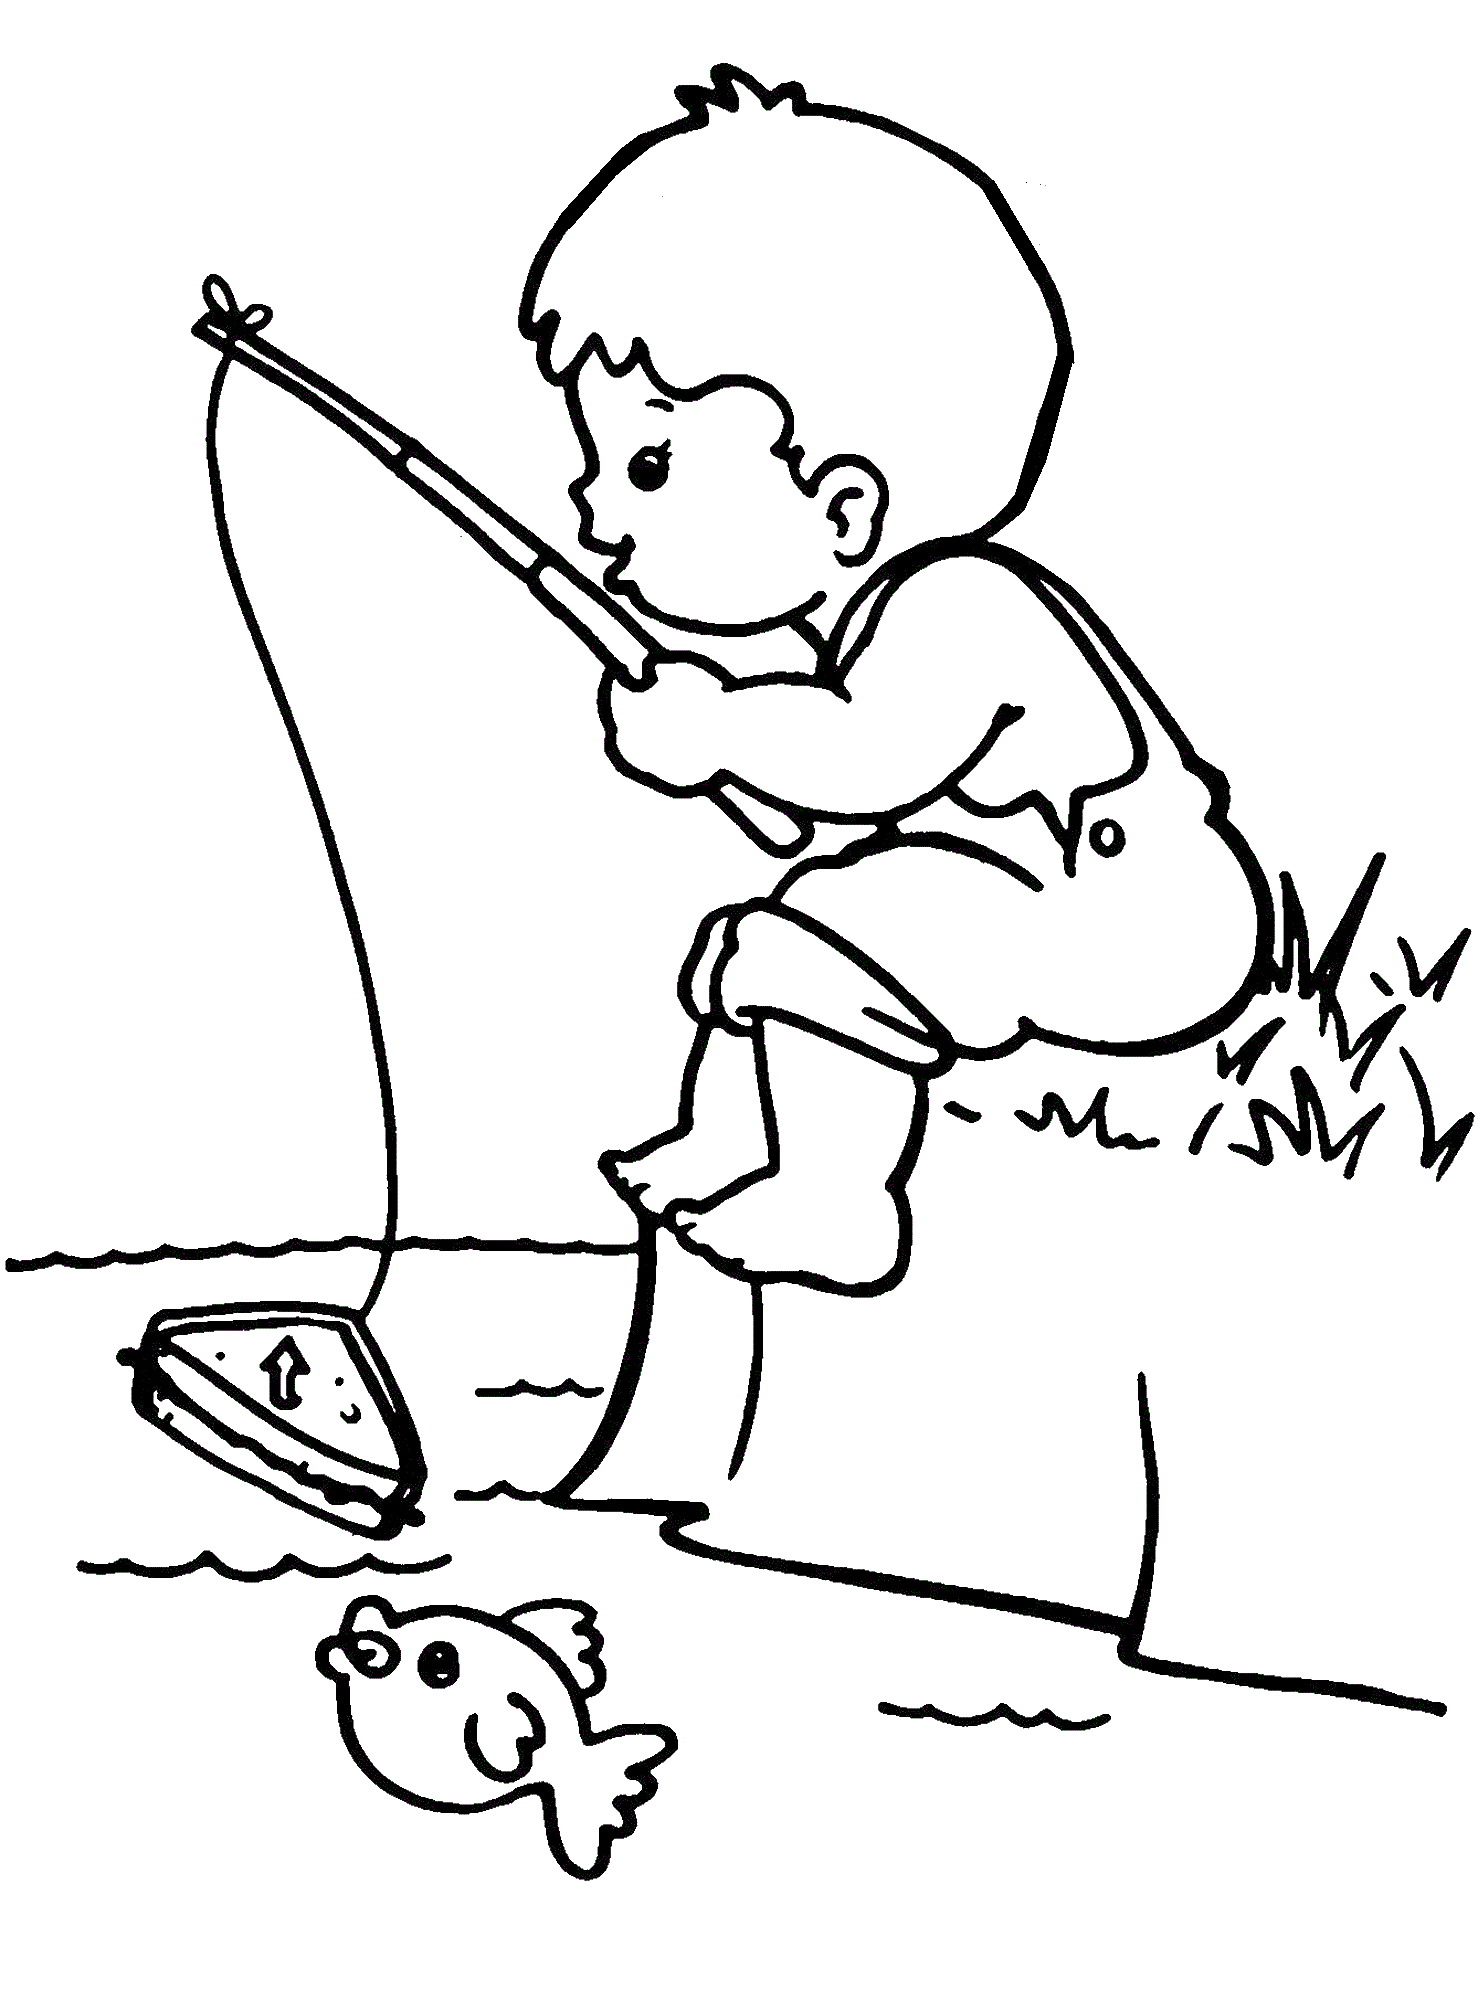 Little Boy Coloring Pages Fishing Coloring Pages Best Coloring Pages For Kids